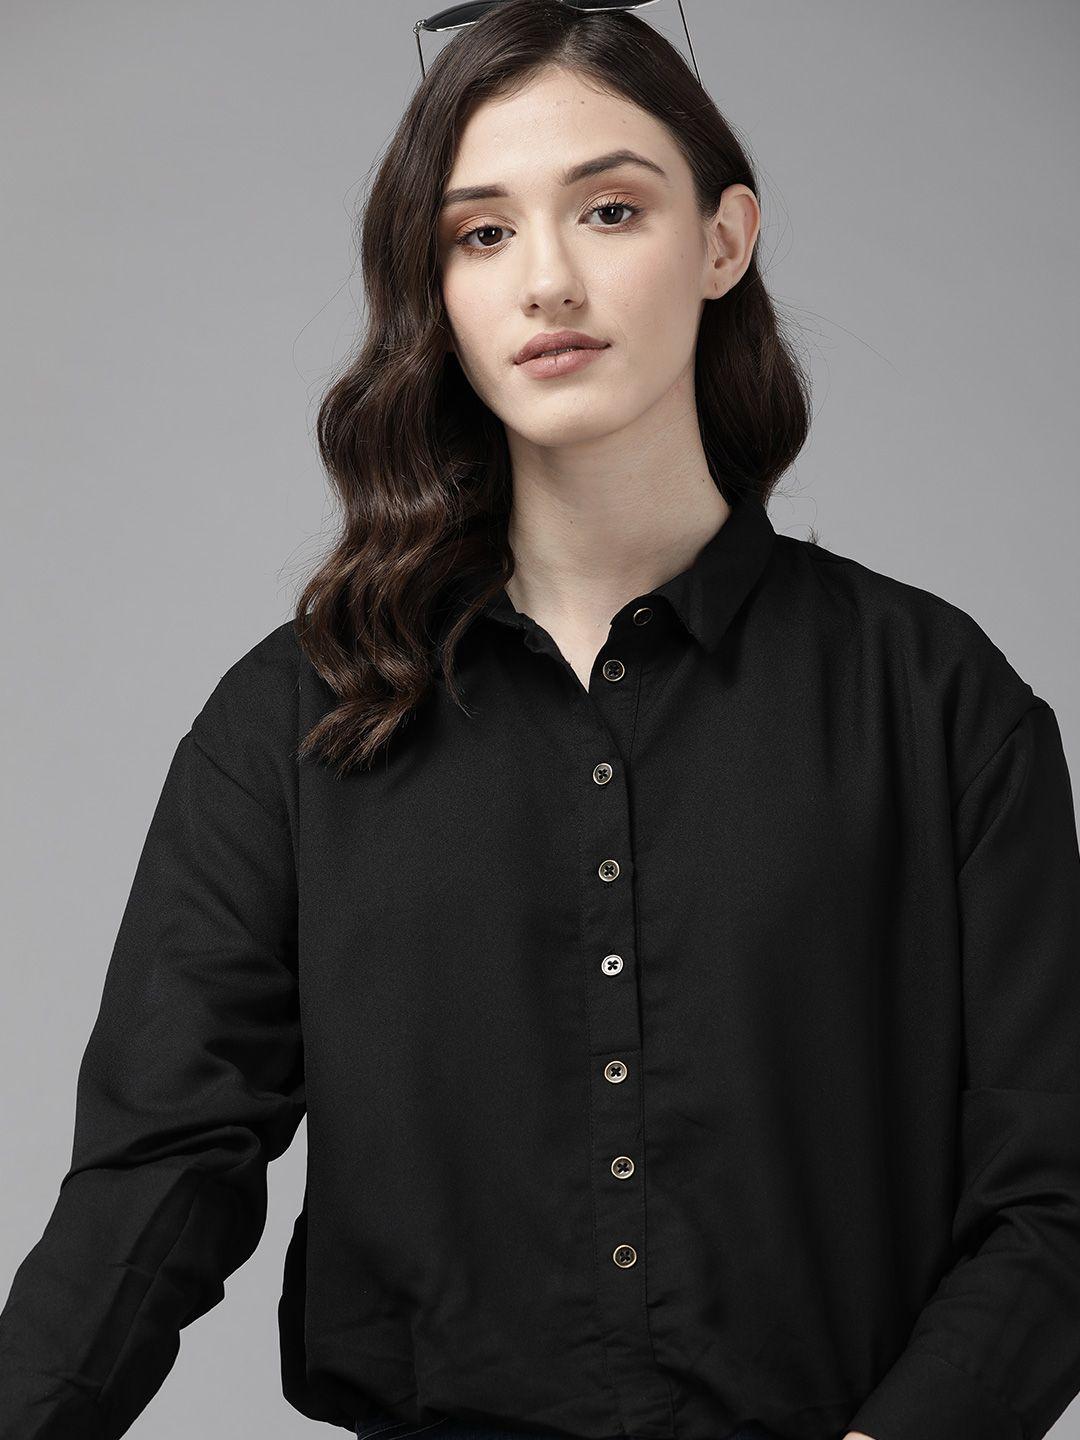 the roadster lifestyle co. black shirt style crop top